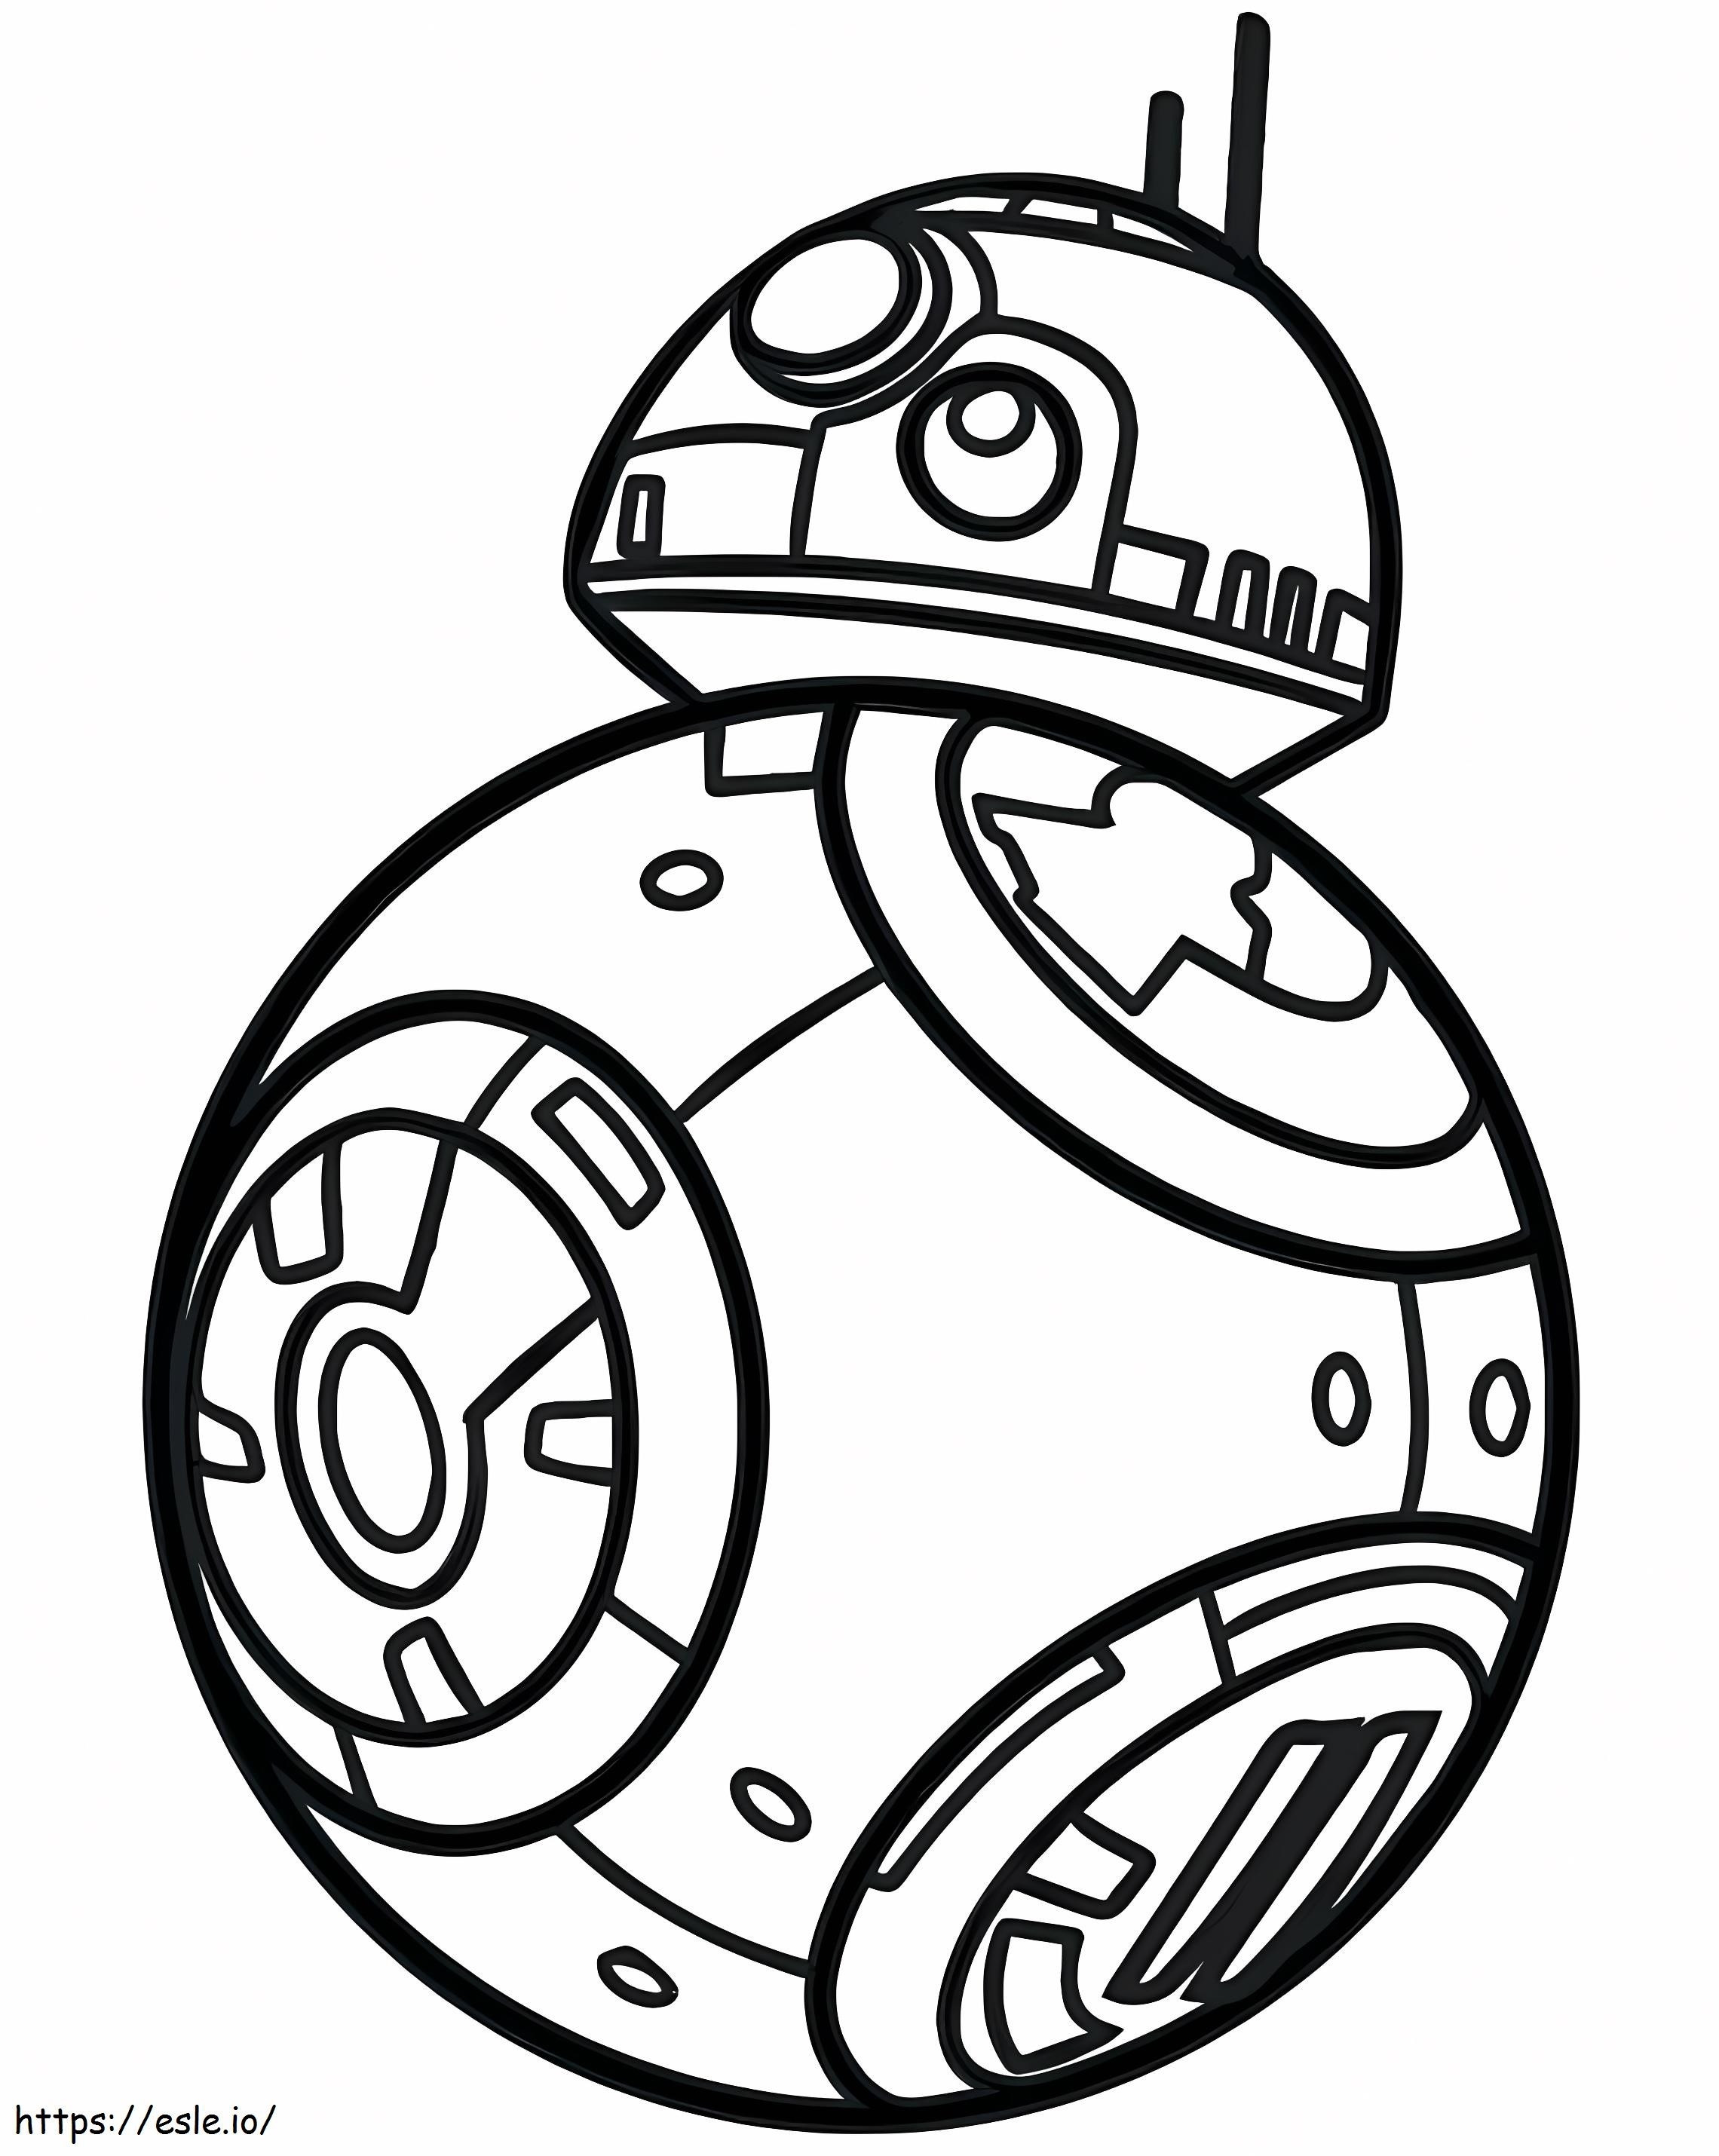 BB 8 Star Wars coloring page